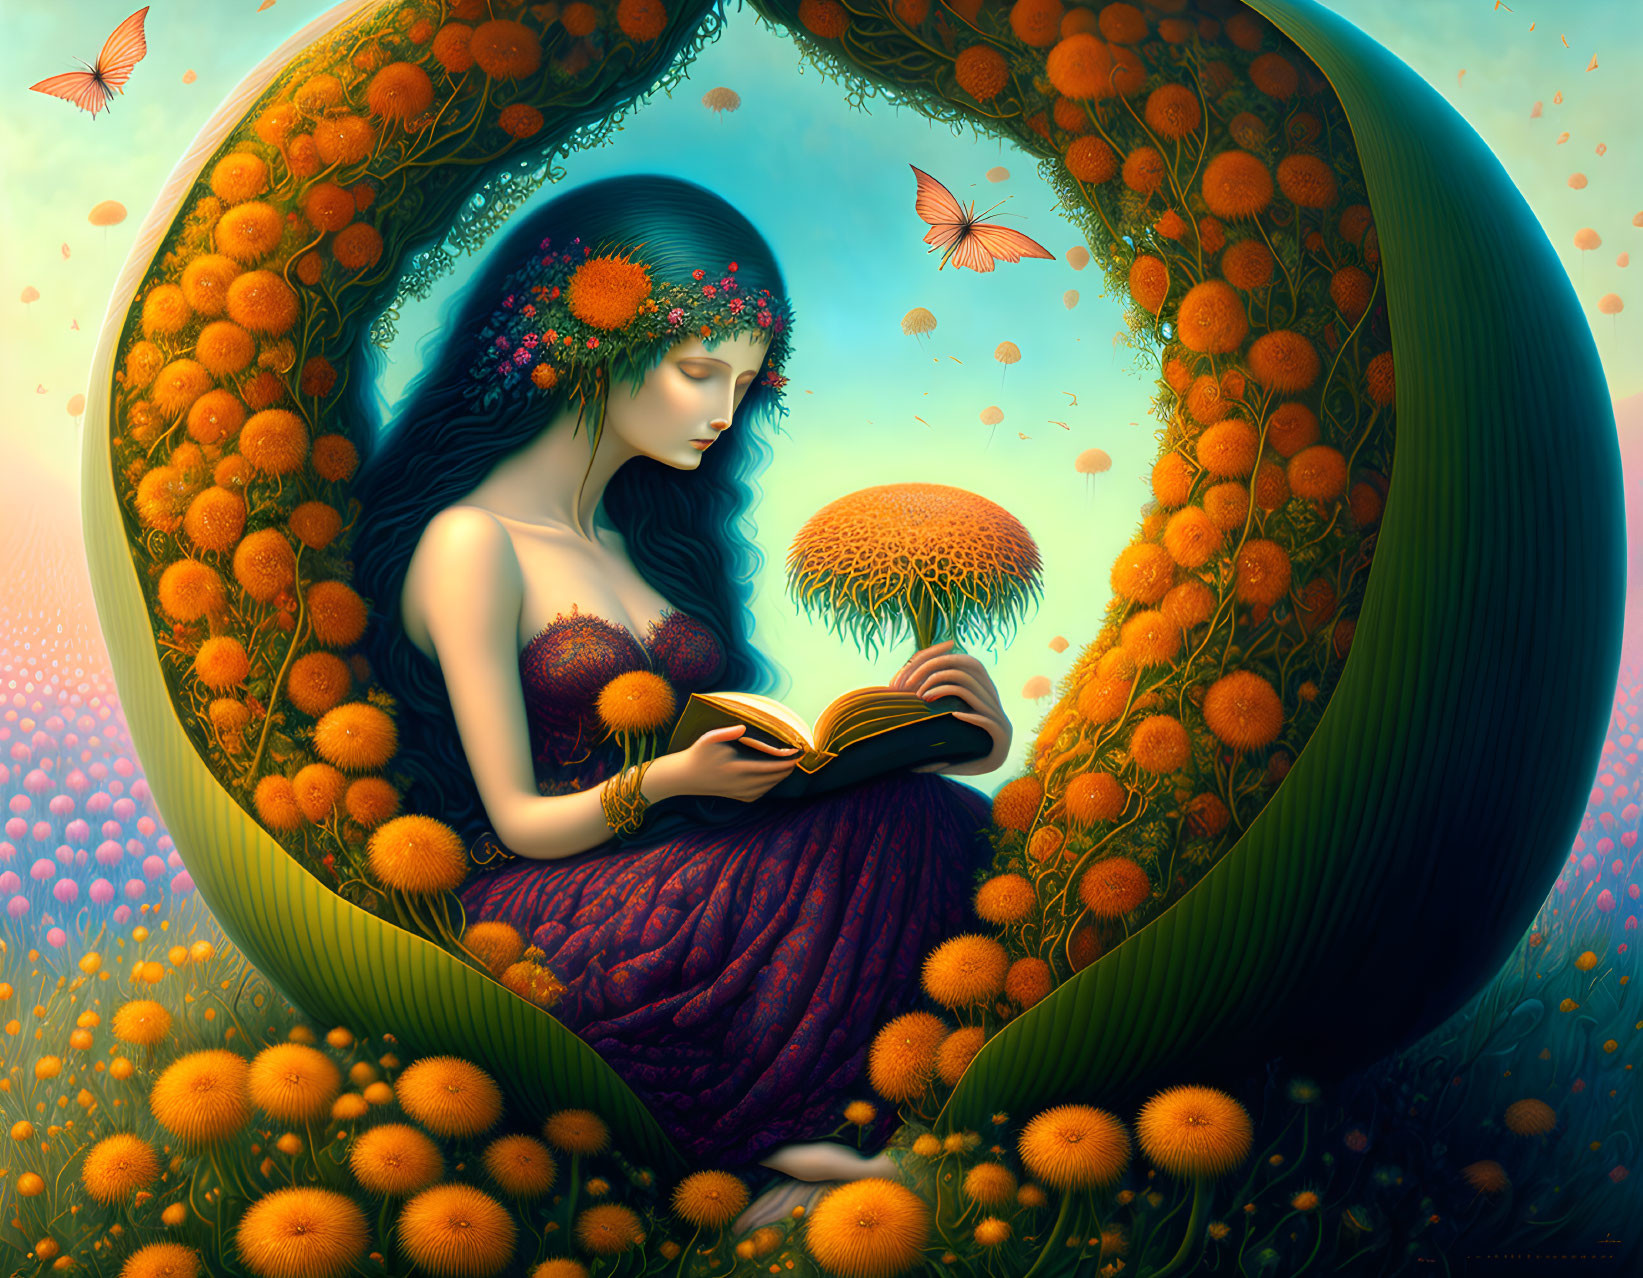 Woman with floral crown reading book in crescent moon surrounded by butterflies and blossoms